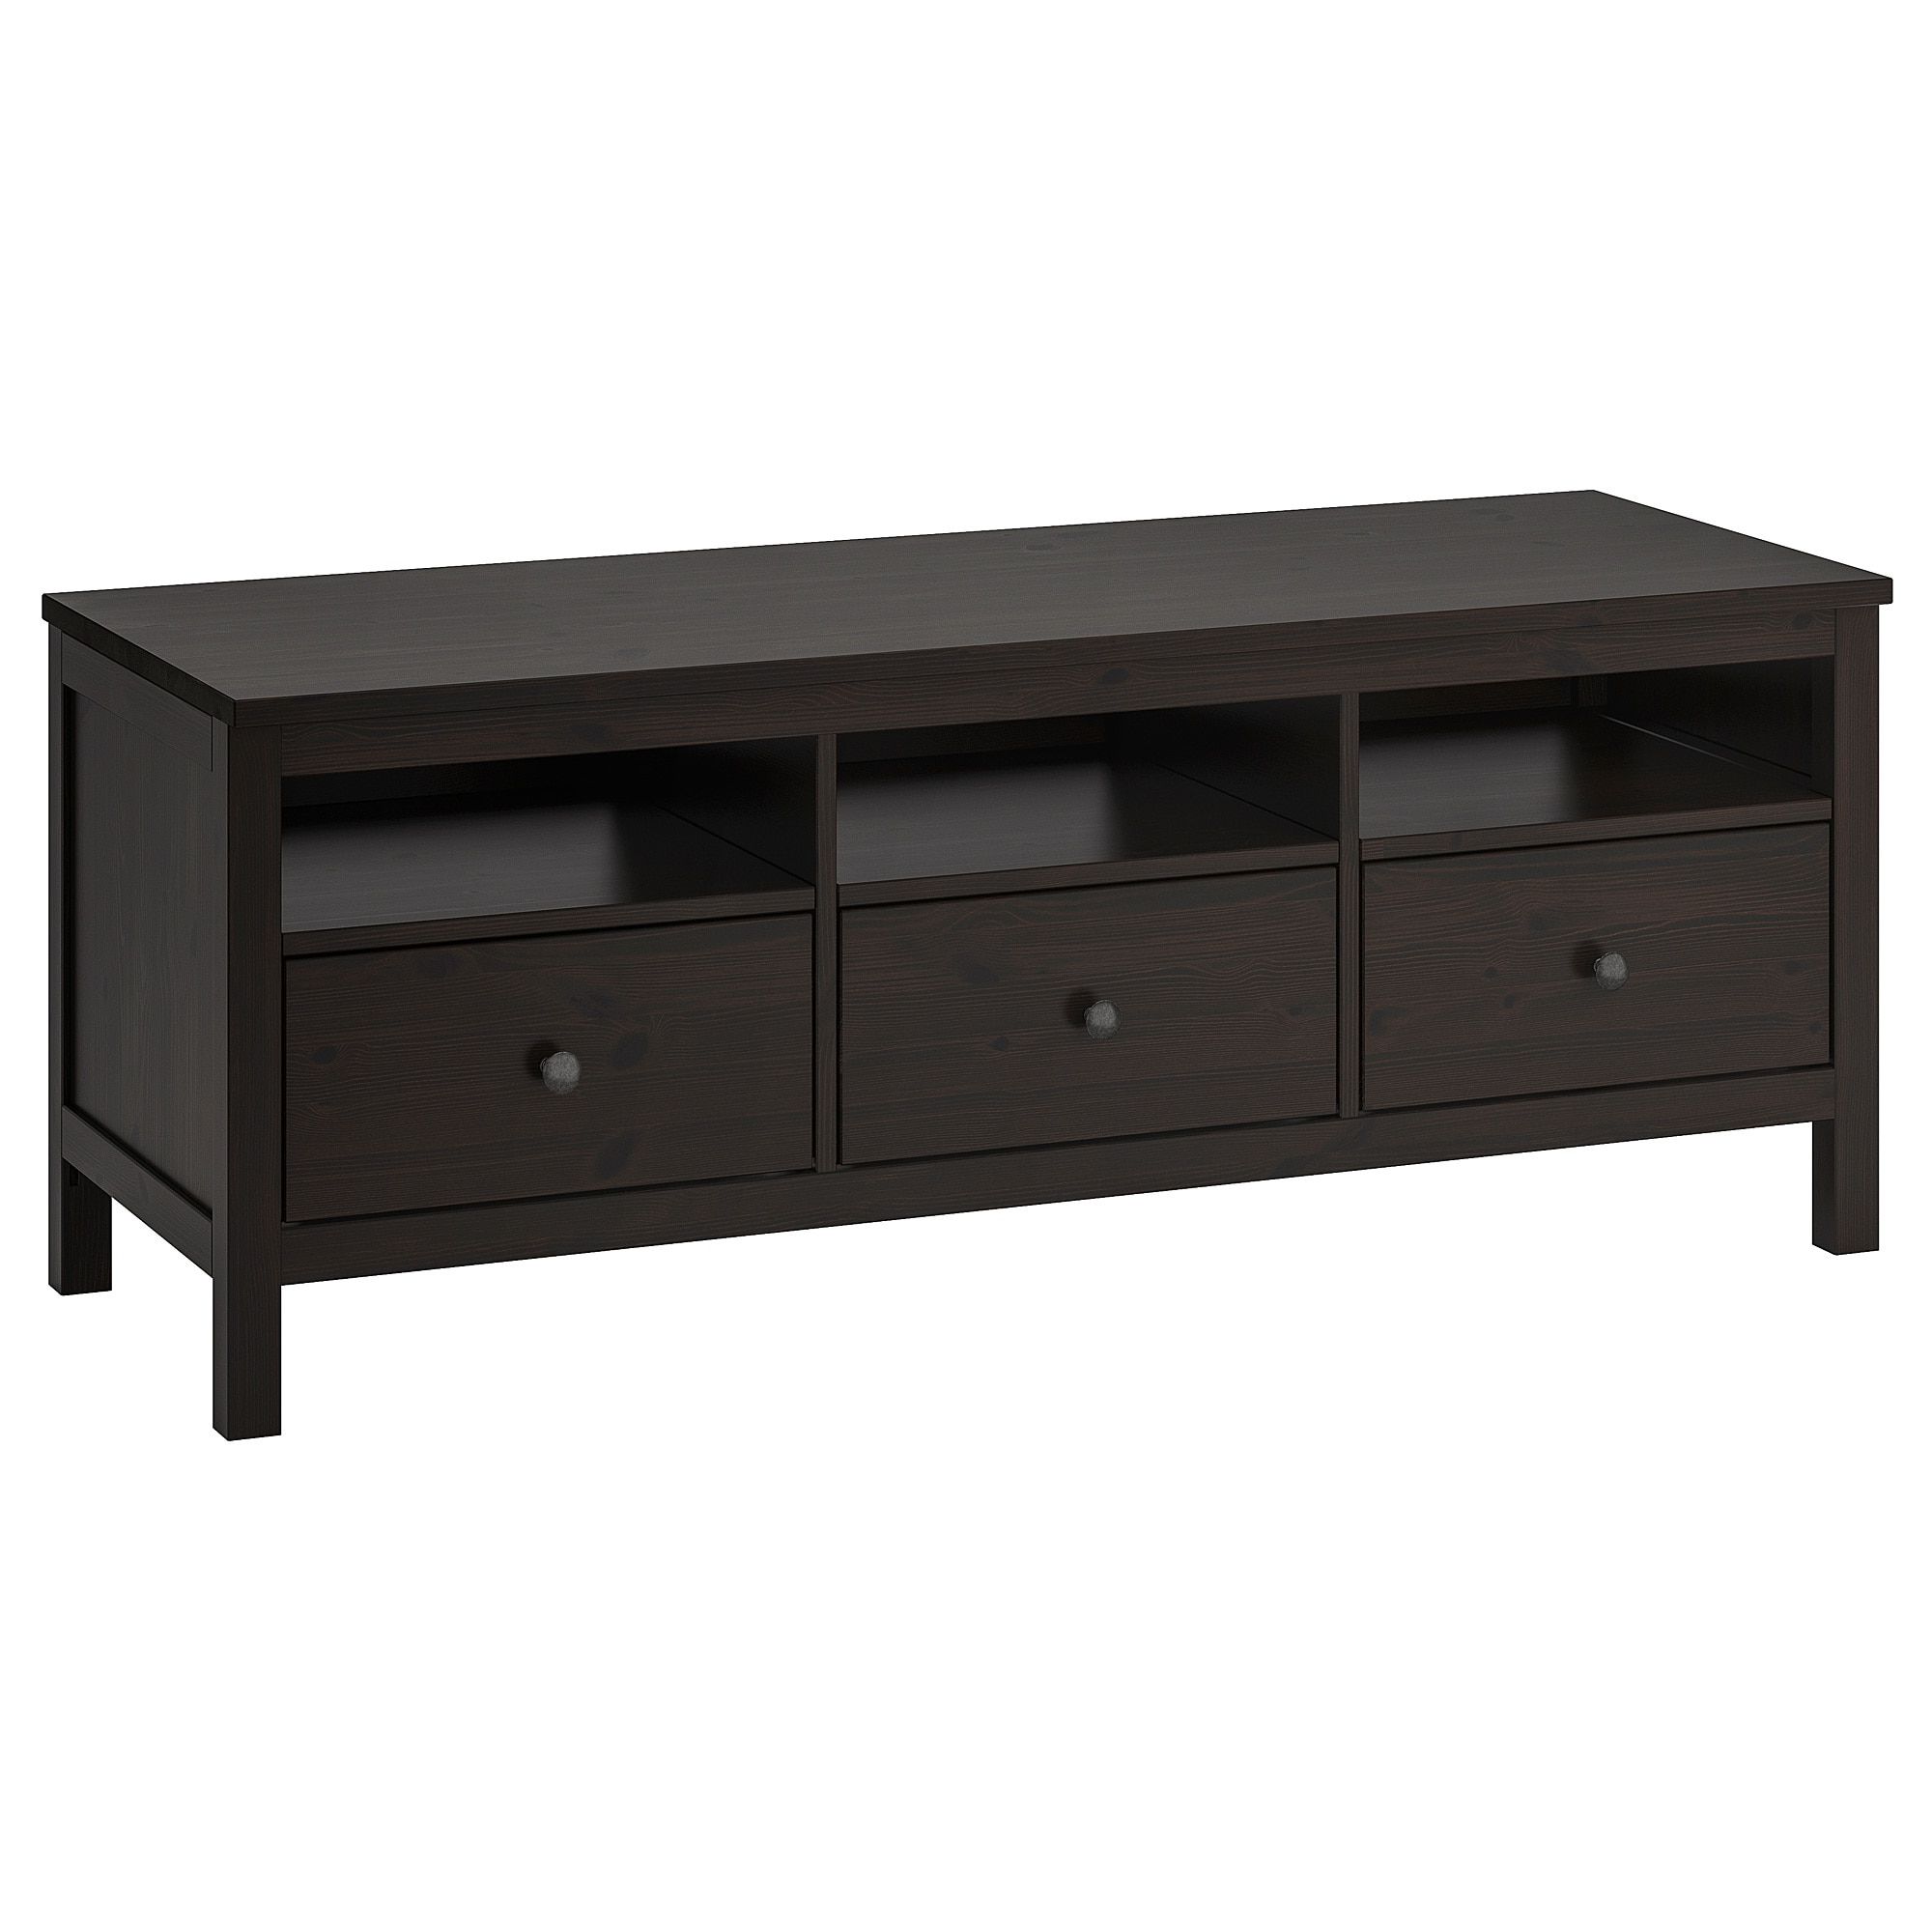 Reclaimed Pine & Iron 72 Inch Sideboards Within Latest Hemnes Tv Unit – Black Brown, 58 1/4x18 1/2x22 1/2 " – Ikea (View 14 of 20)